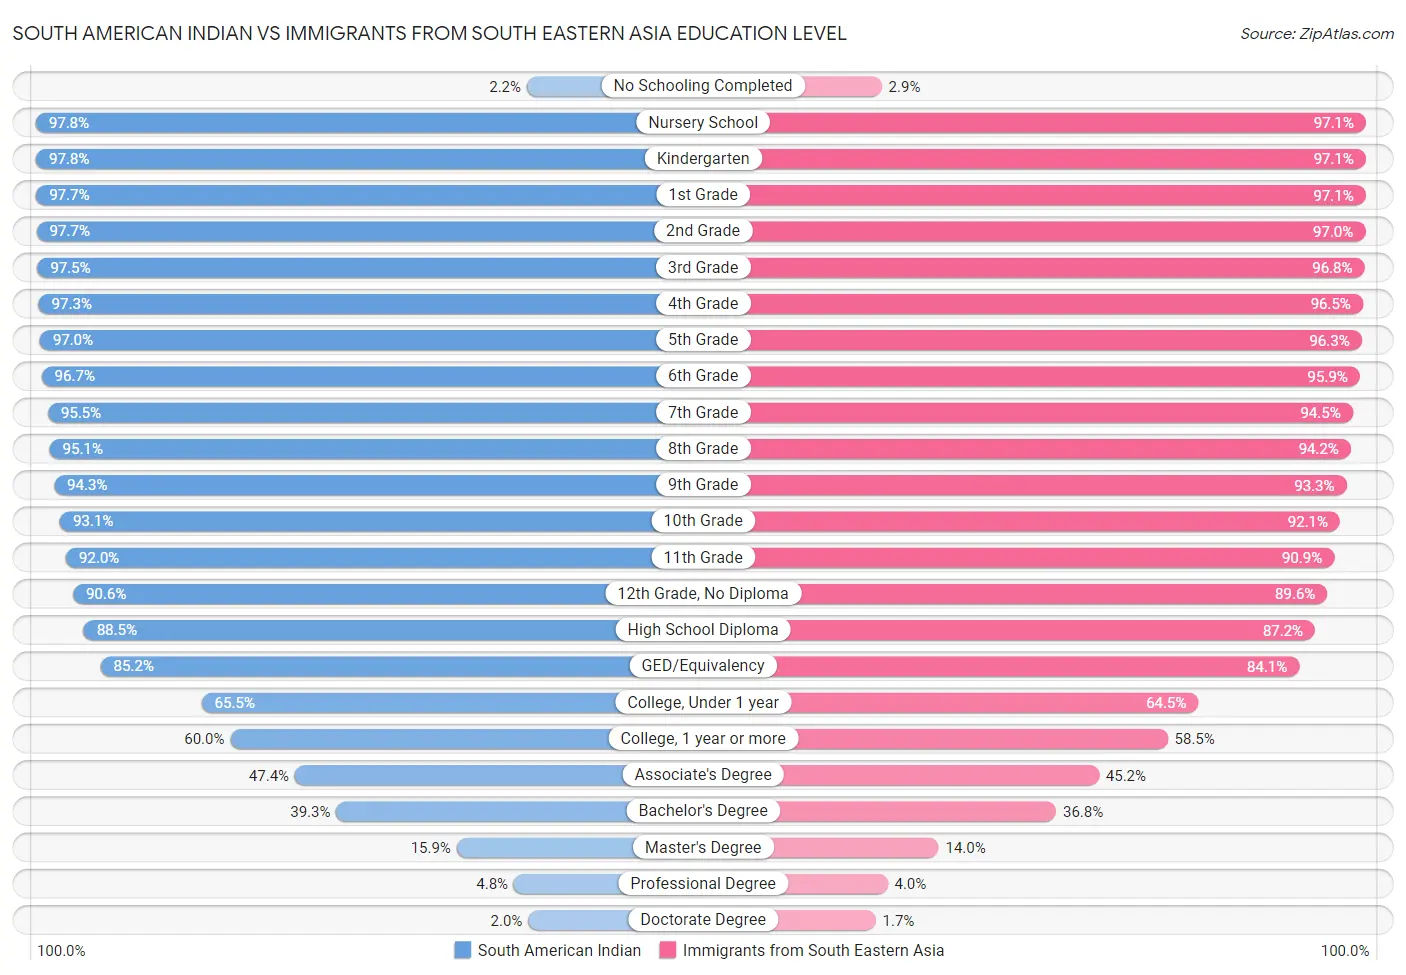 South American Indian vs Immigrants from South Eastern Asia Education Level